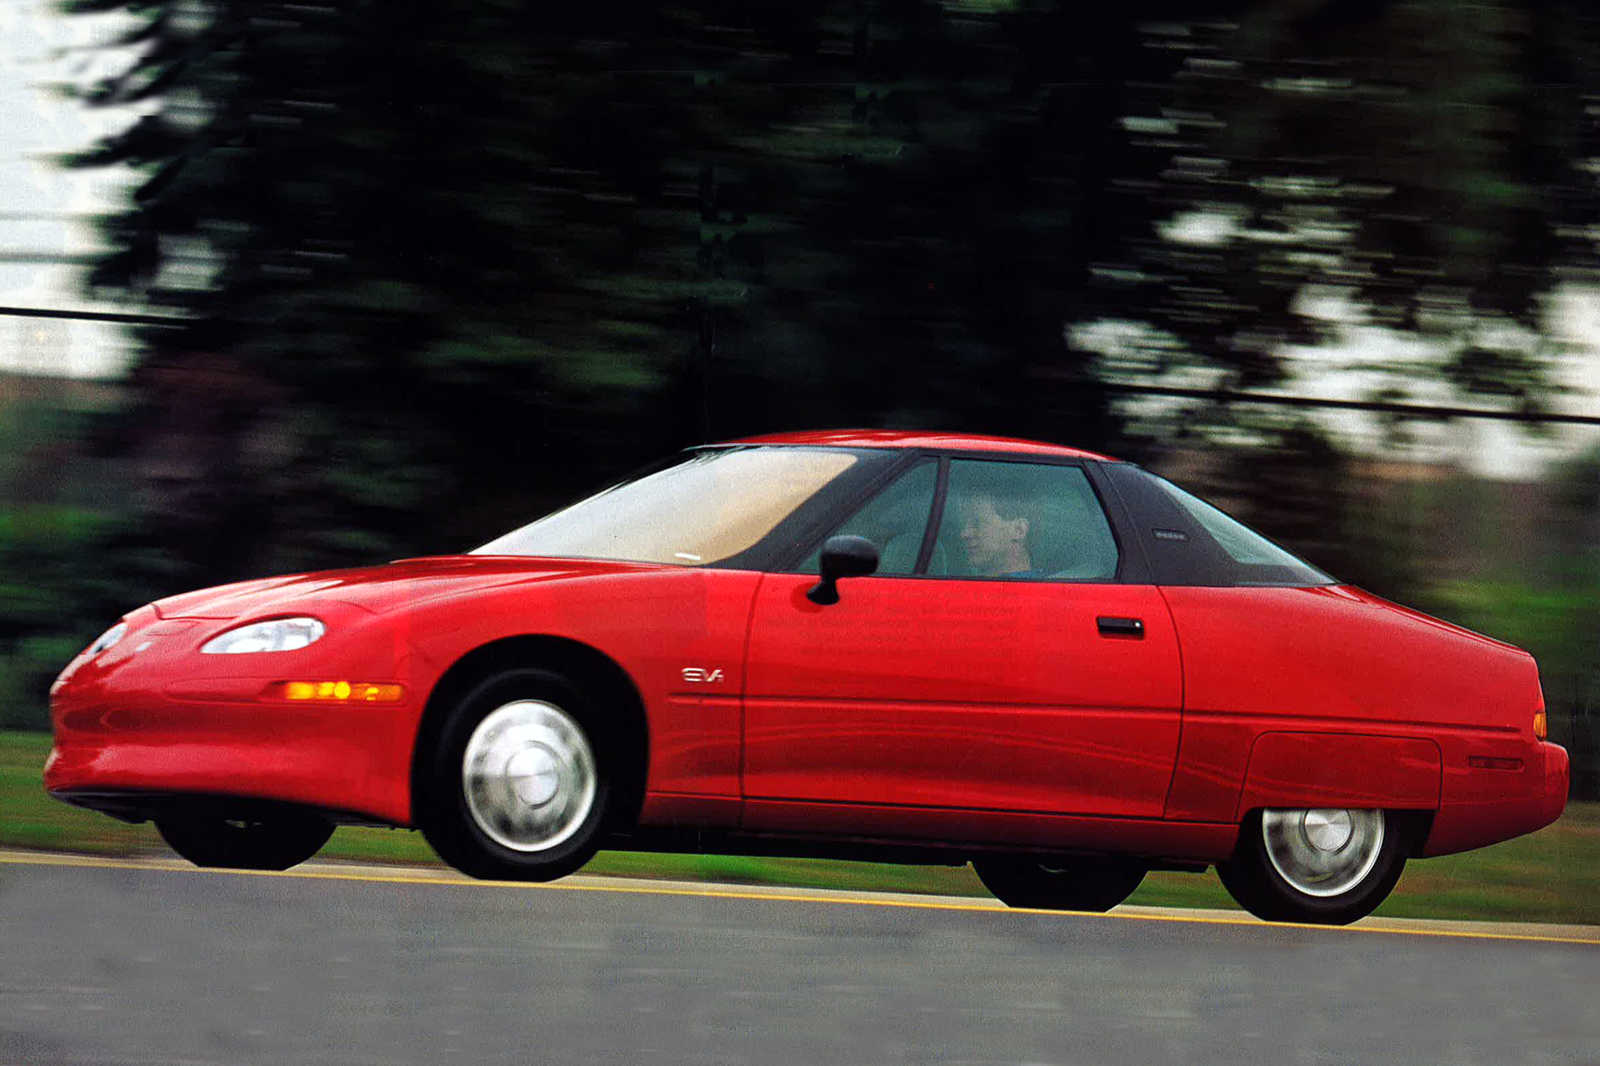 The rare photo of an EV1 running and driving